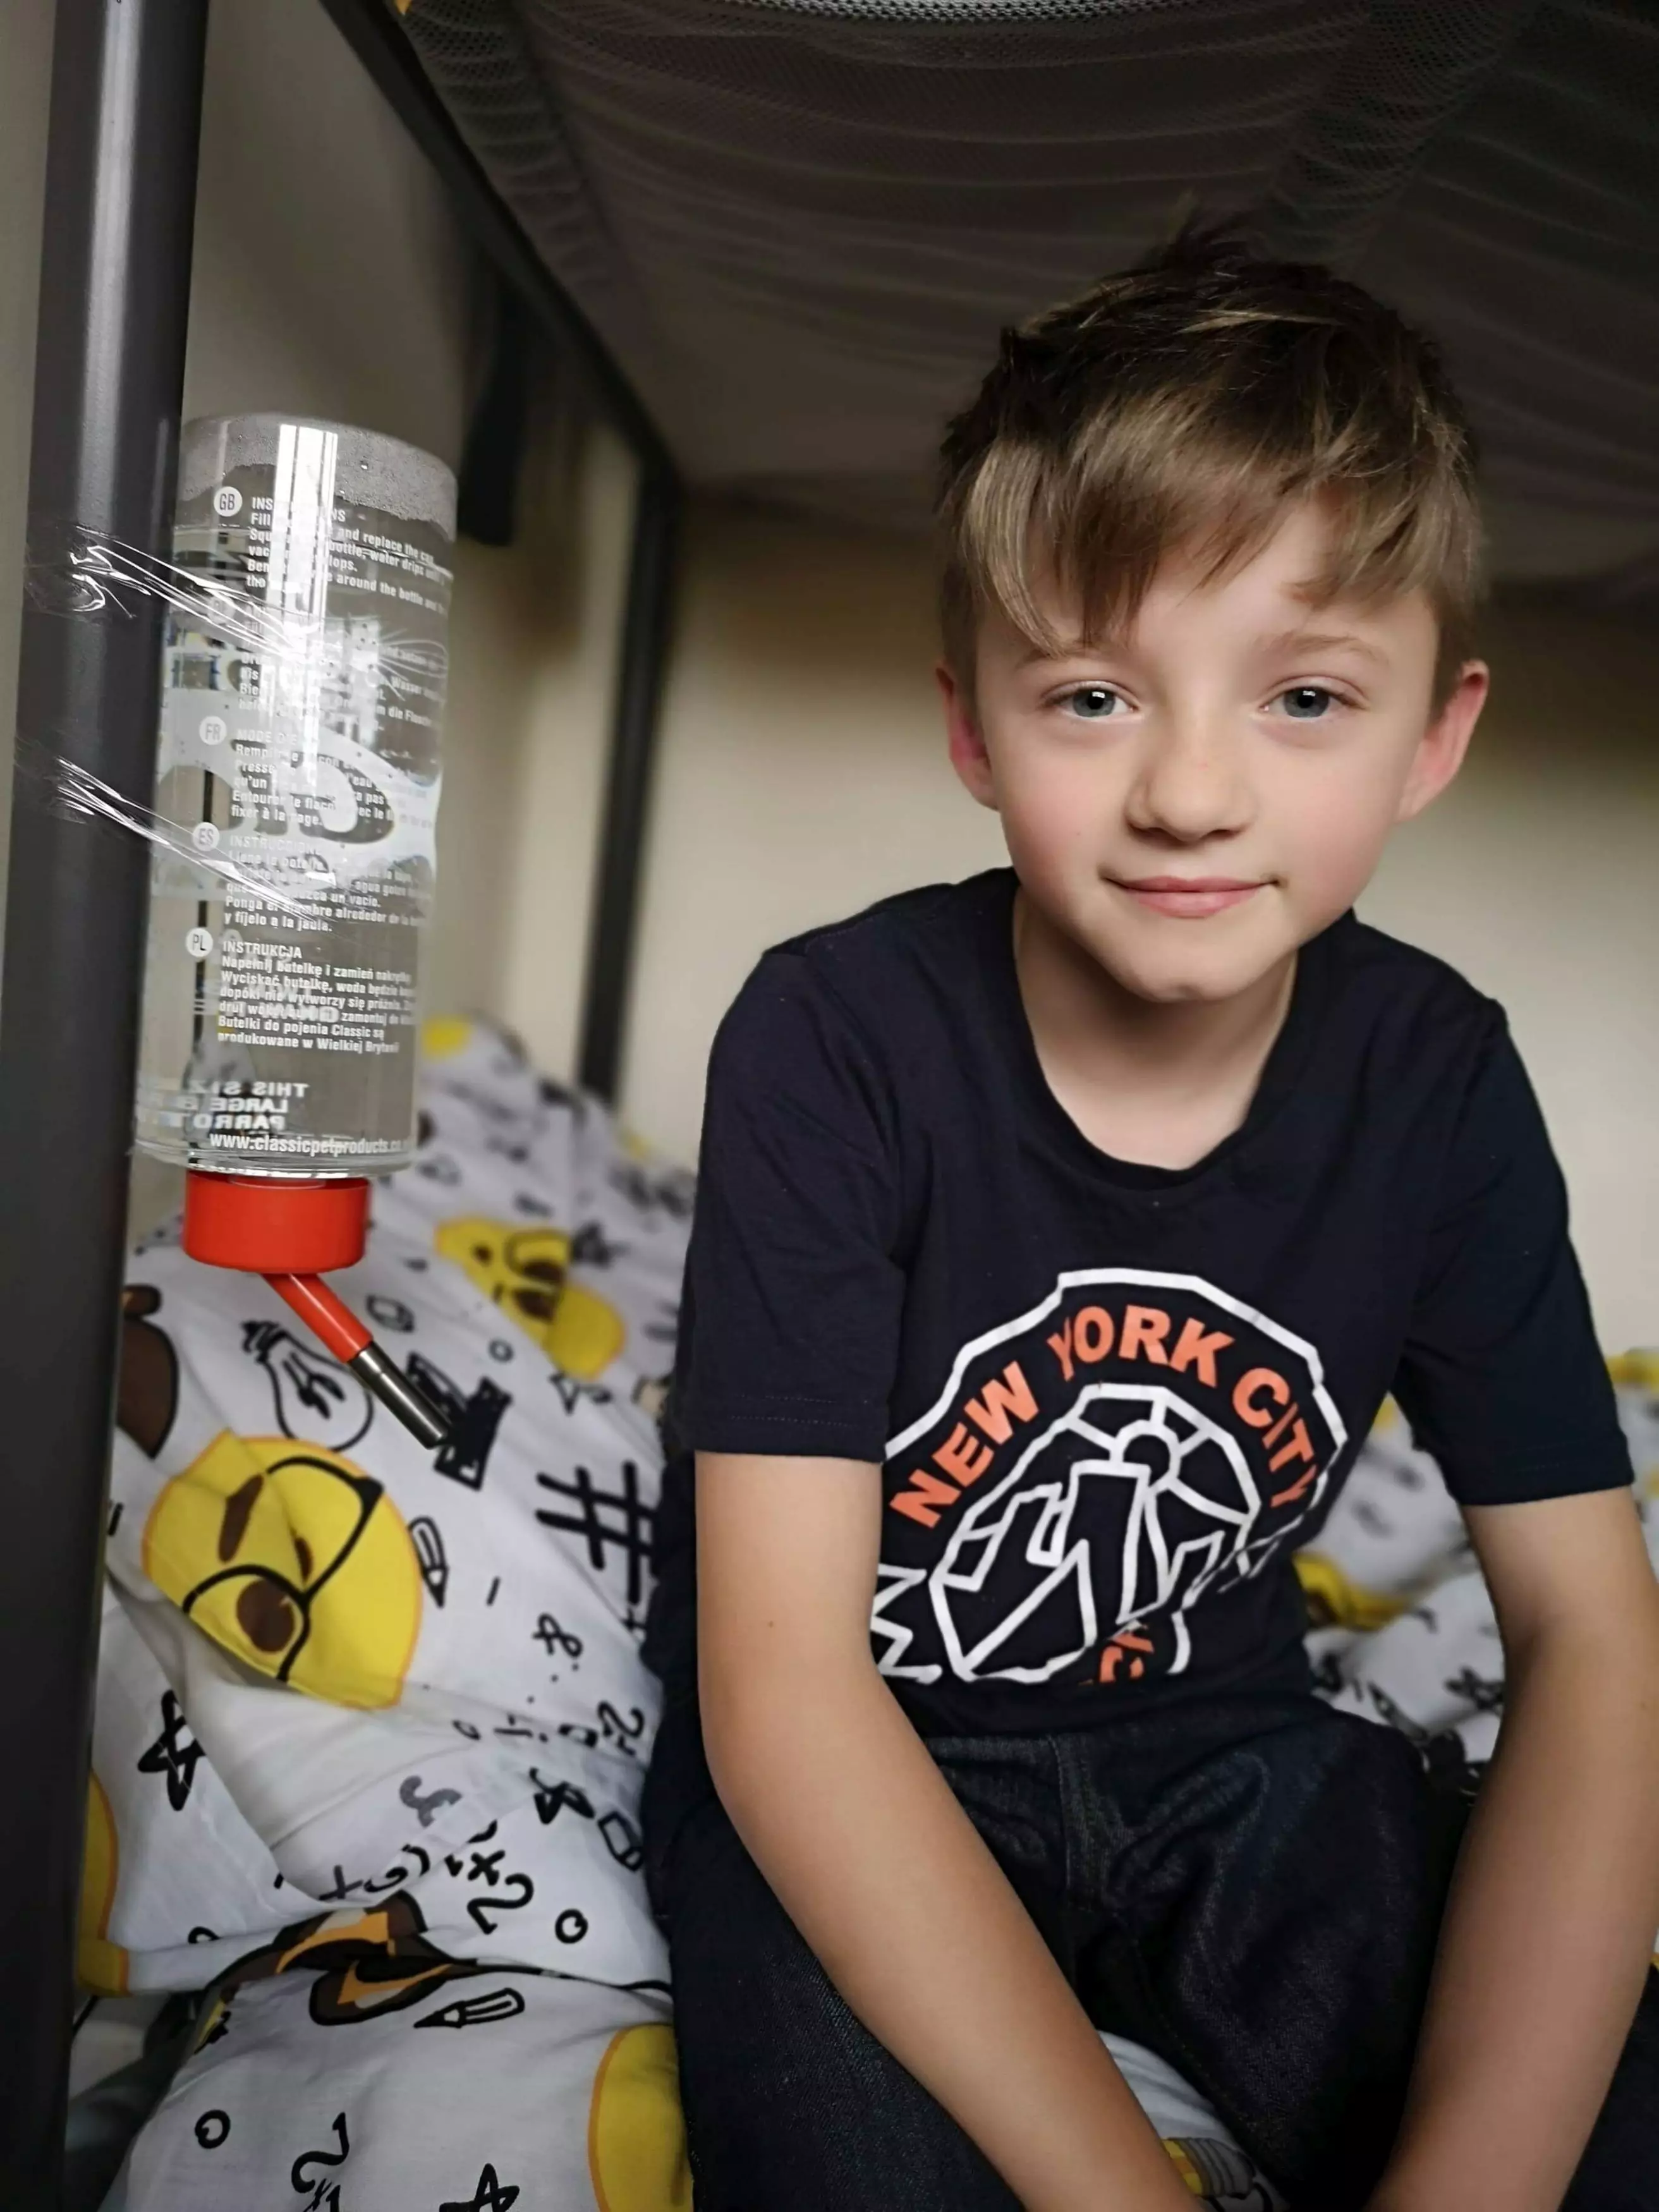 Although intended as a prank, eight-year-old Logan has used the water bottle.